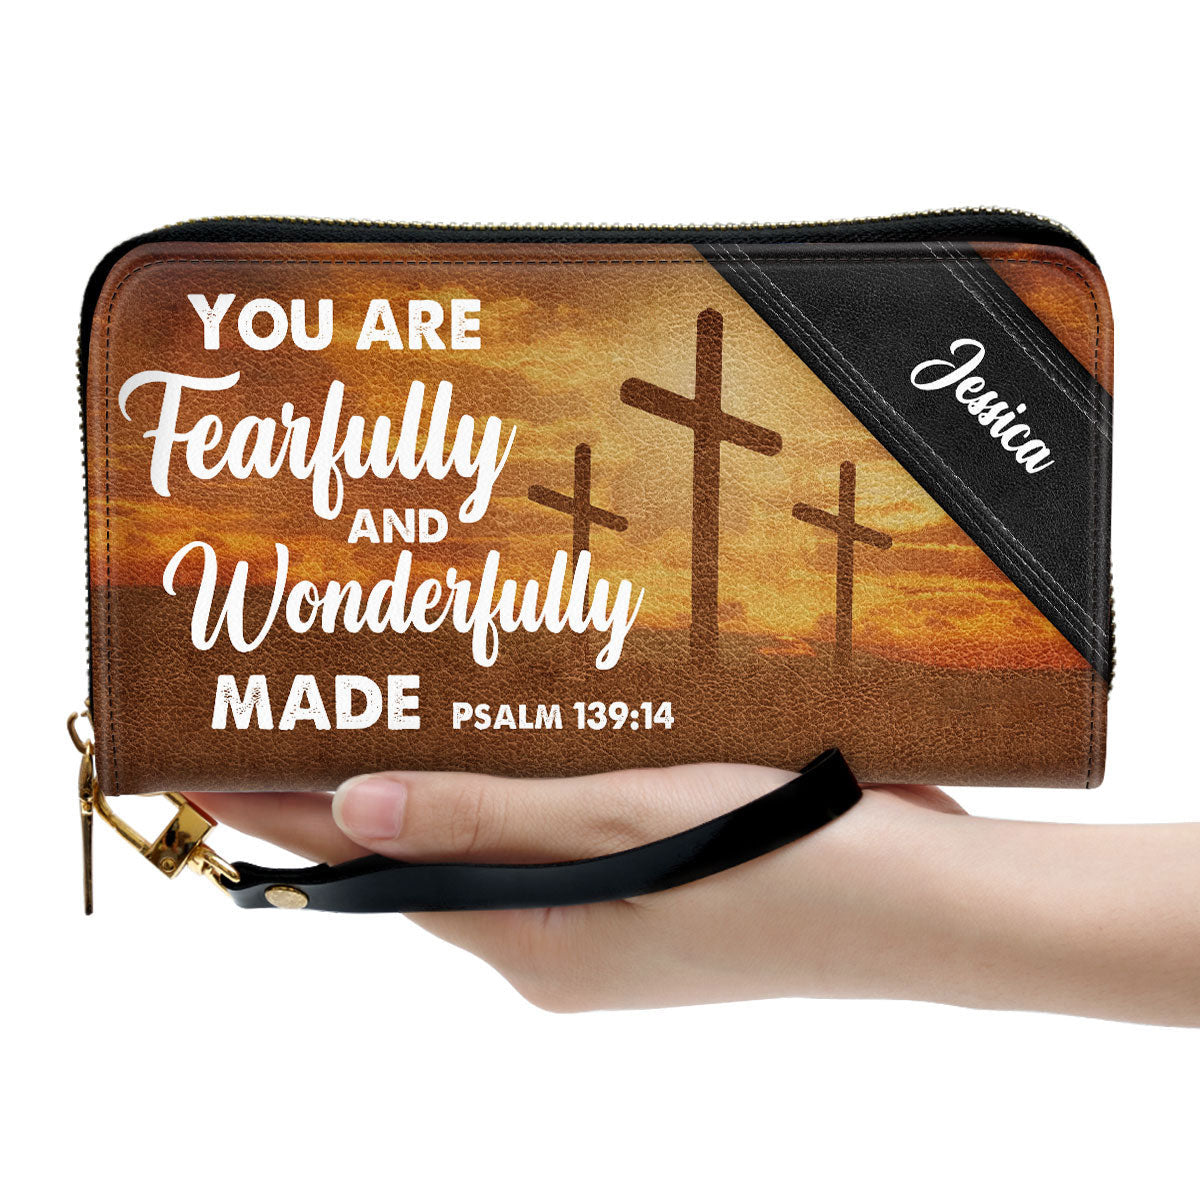 You Are Fearfully And Wonderfully Made Psalm 139 14 Cross Clutch Purse For Women - Personalized Name - Christian Gifts For Women